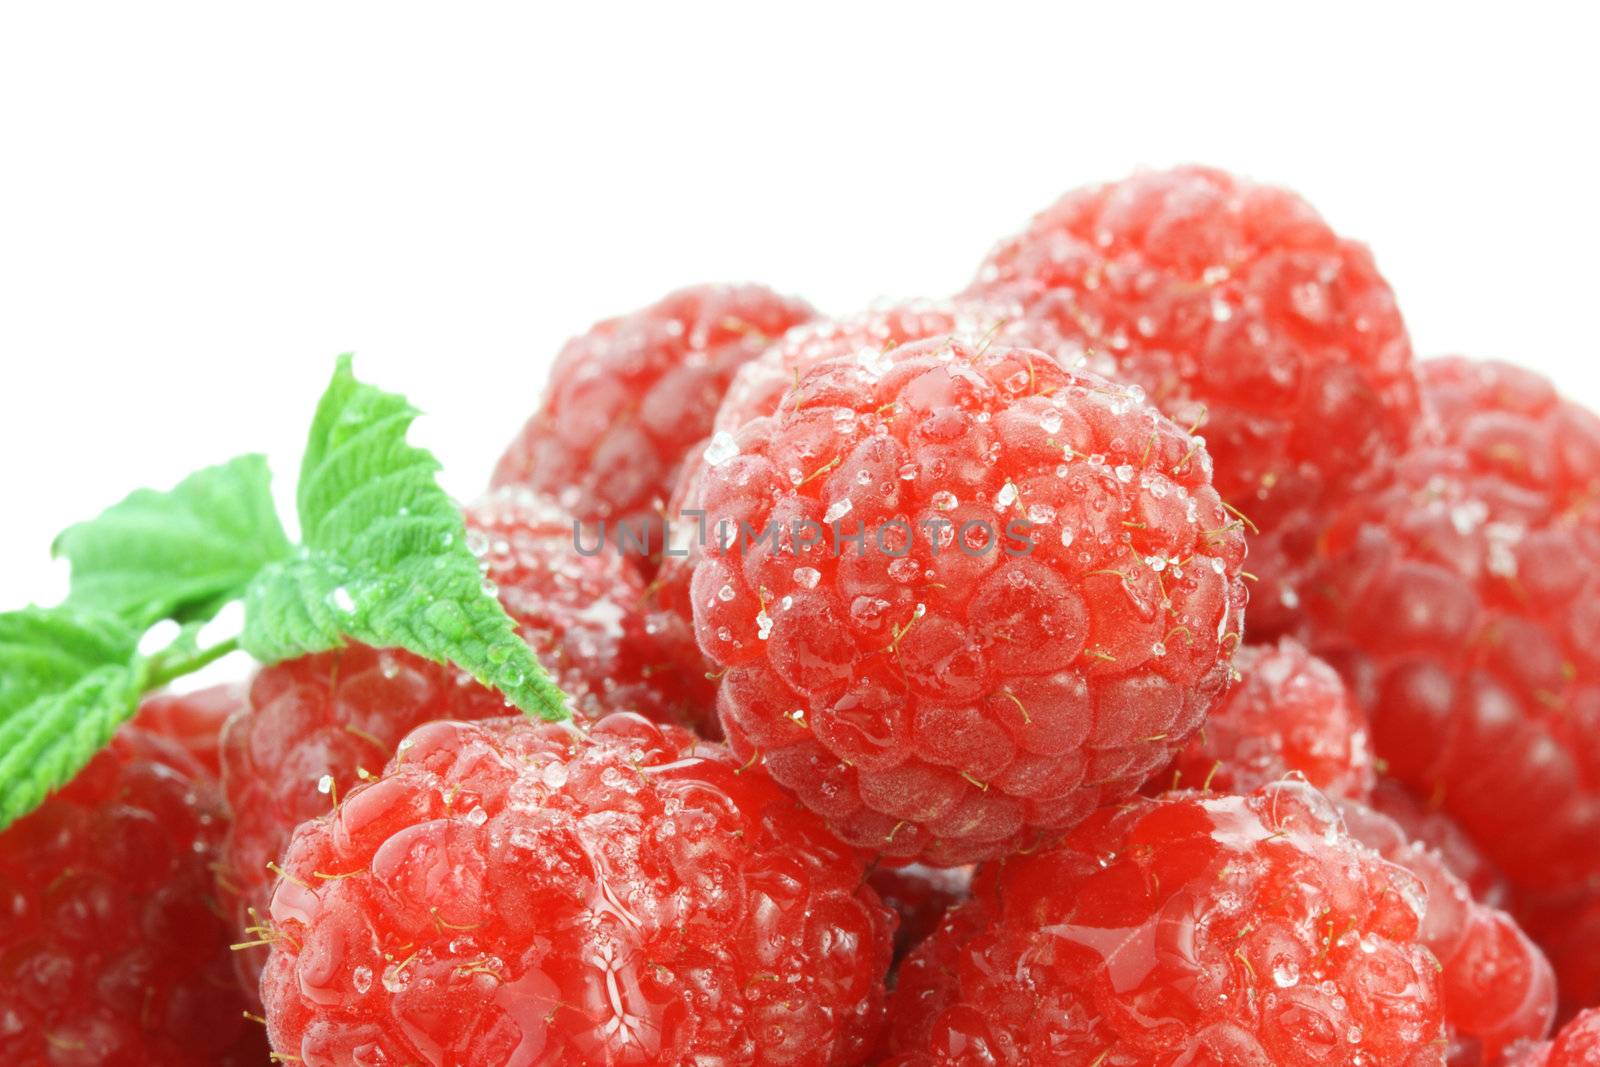 Fresh red raspberries sprinkled with sugar isolated against a white background.